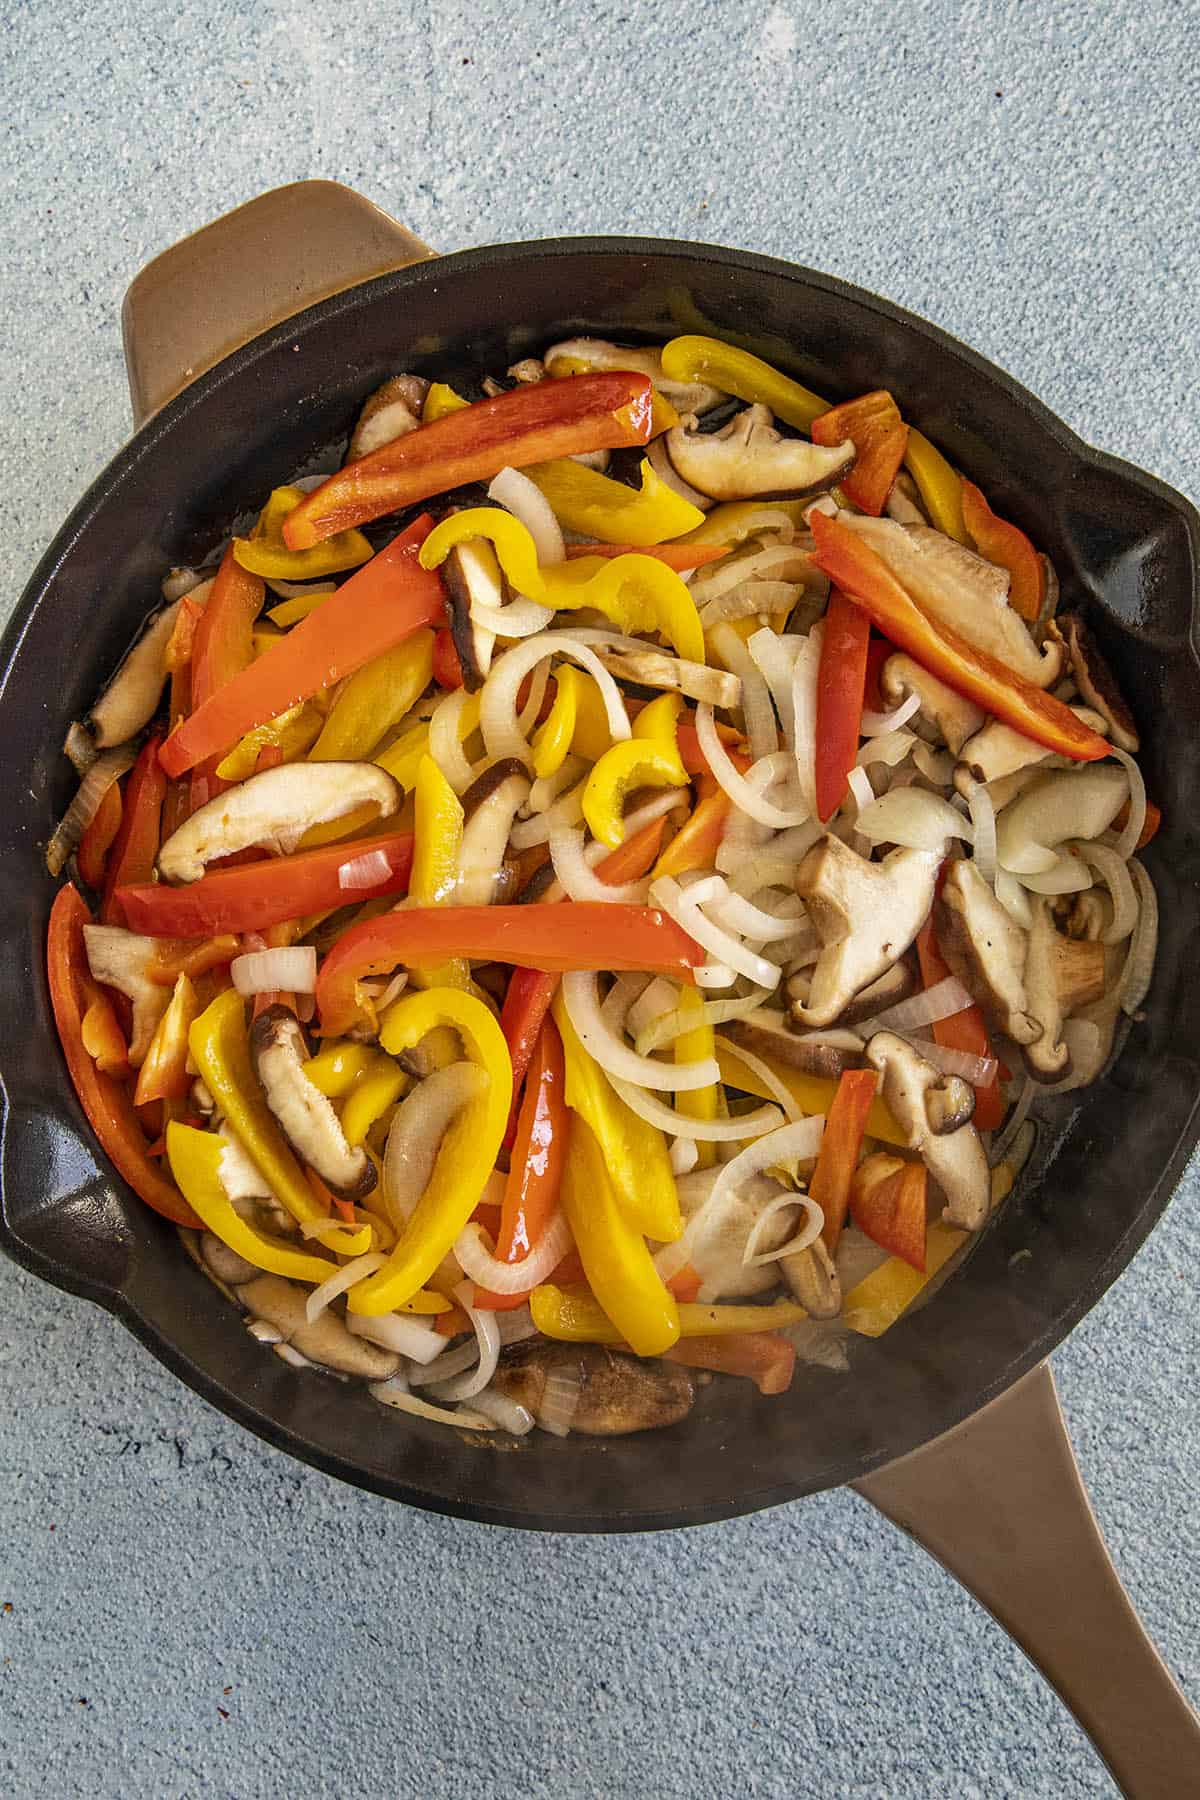 Cooking peppers, onions and mushrooms to make Chicken Cacciatore